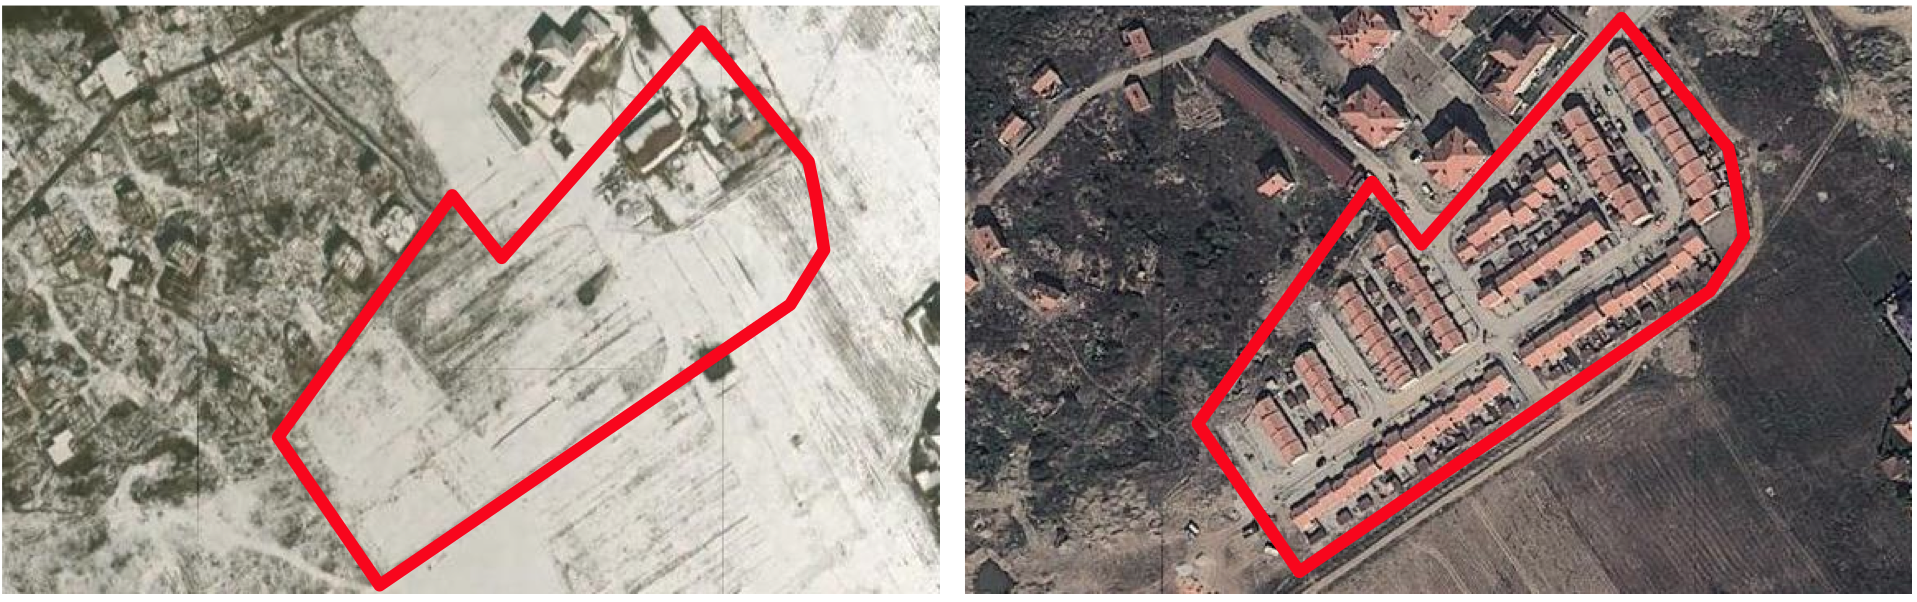 Figure 1: Air photographs of the Roma Mahalla site prior to development (left image - snow-covered in March 2005), and post development (right image - September 2011). The red box demarcates the development site boundary. Images courtesy of Google Earth.